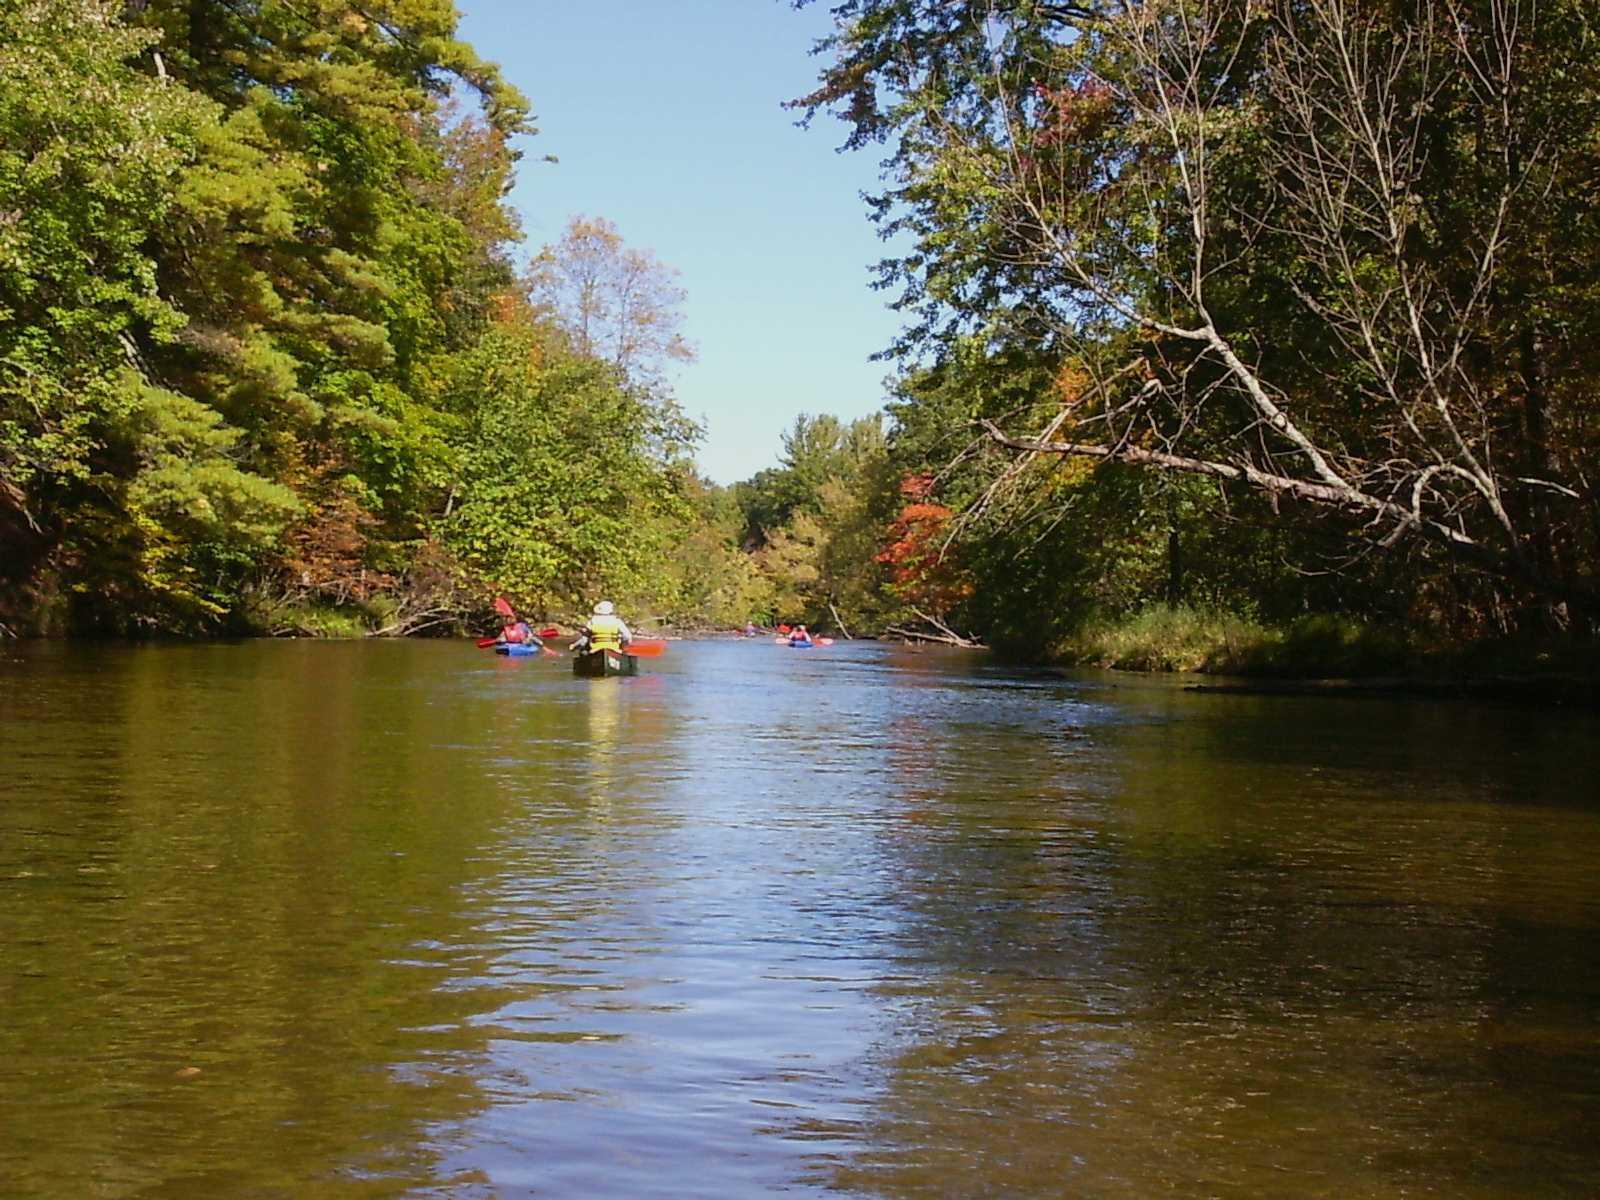 Two kayaks in a river with tree cover.